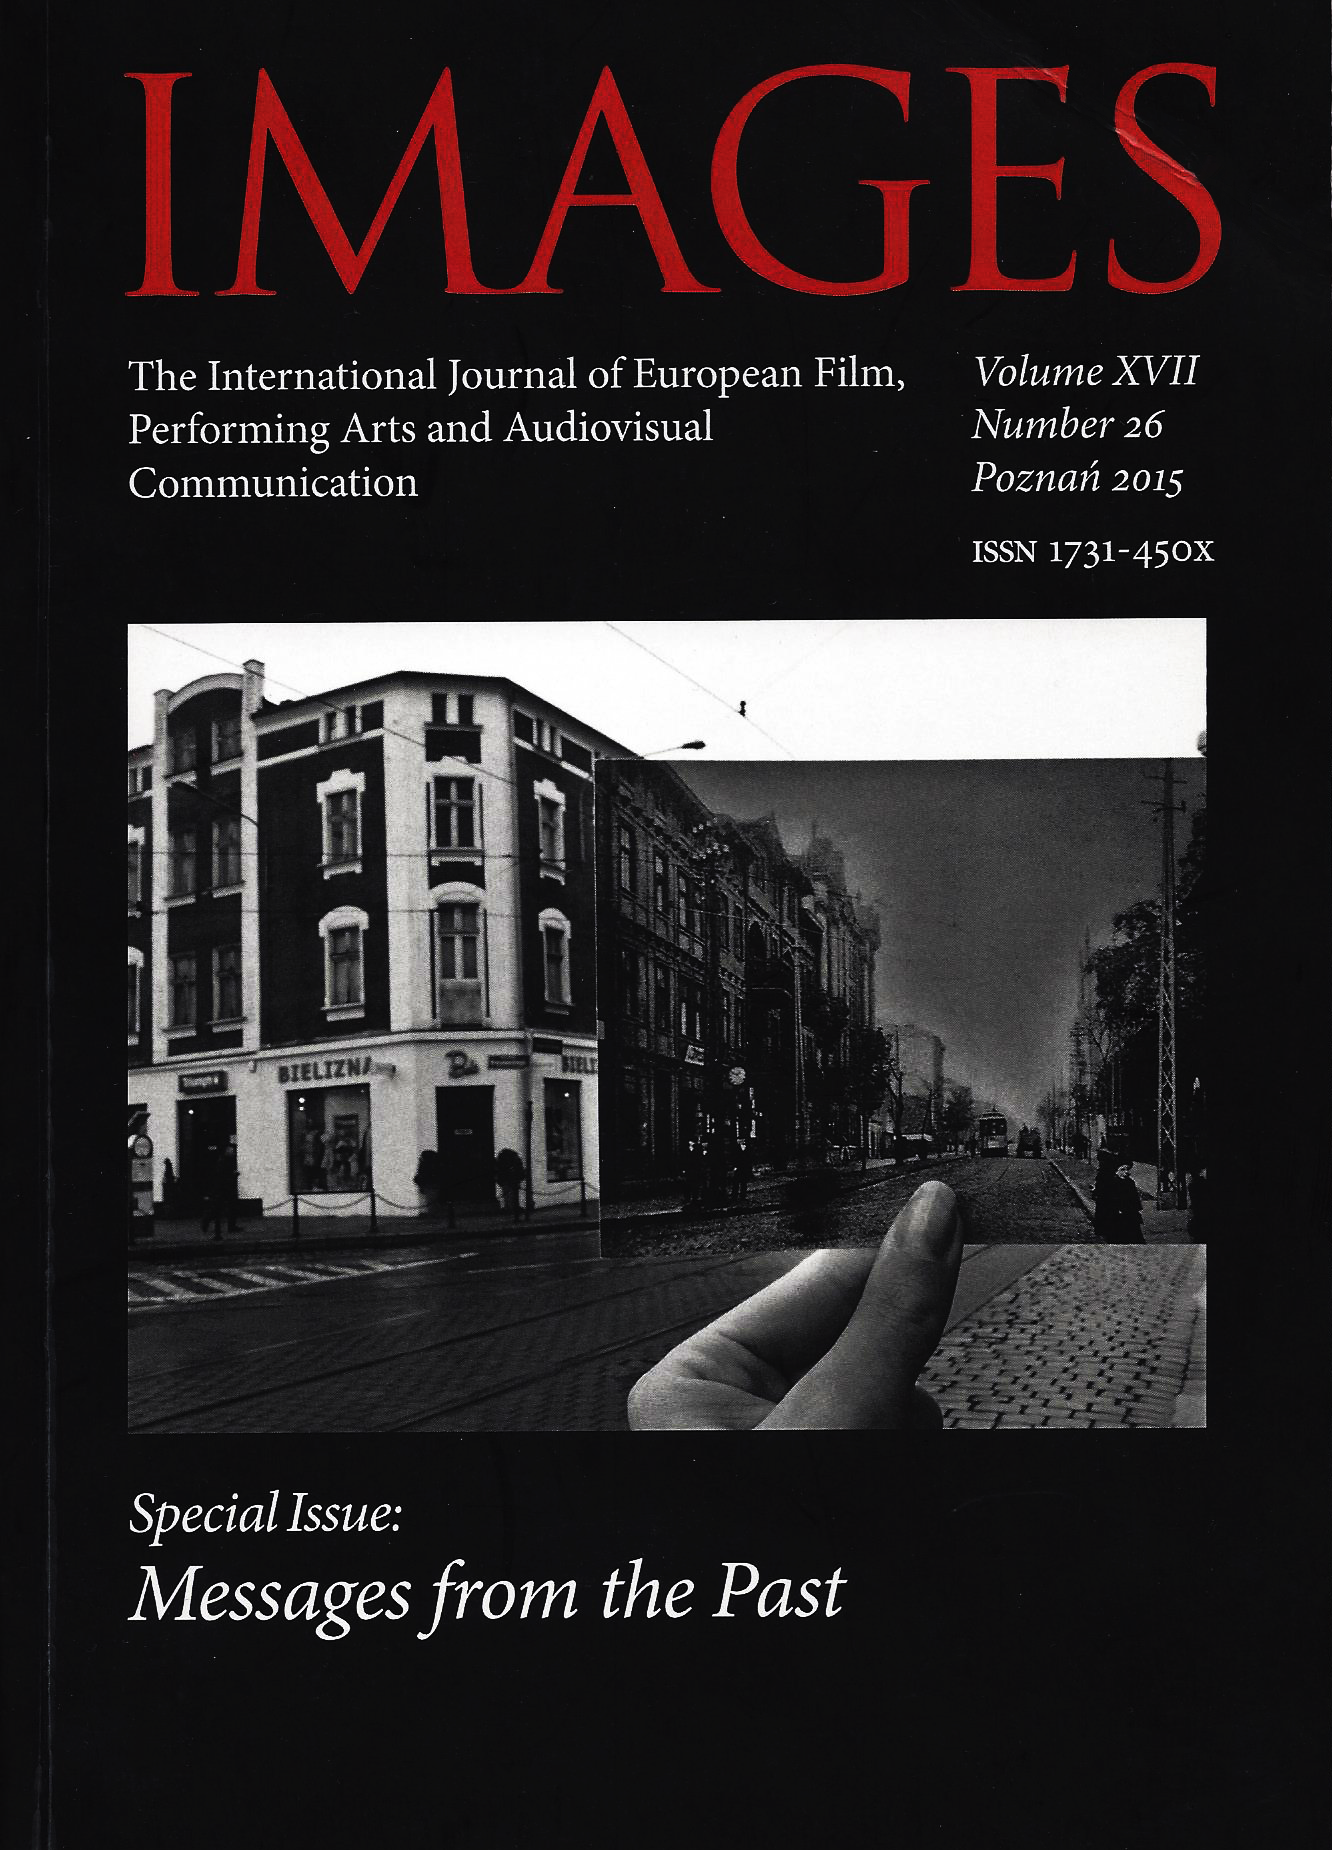 Grand Theatre, Oratory and Anthropology in the Documentaries of Andrzej Fidyk Cover Image